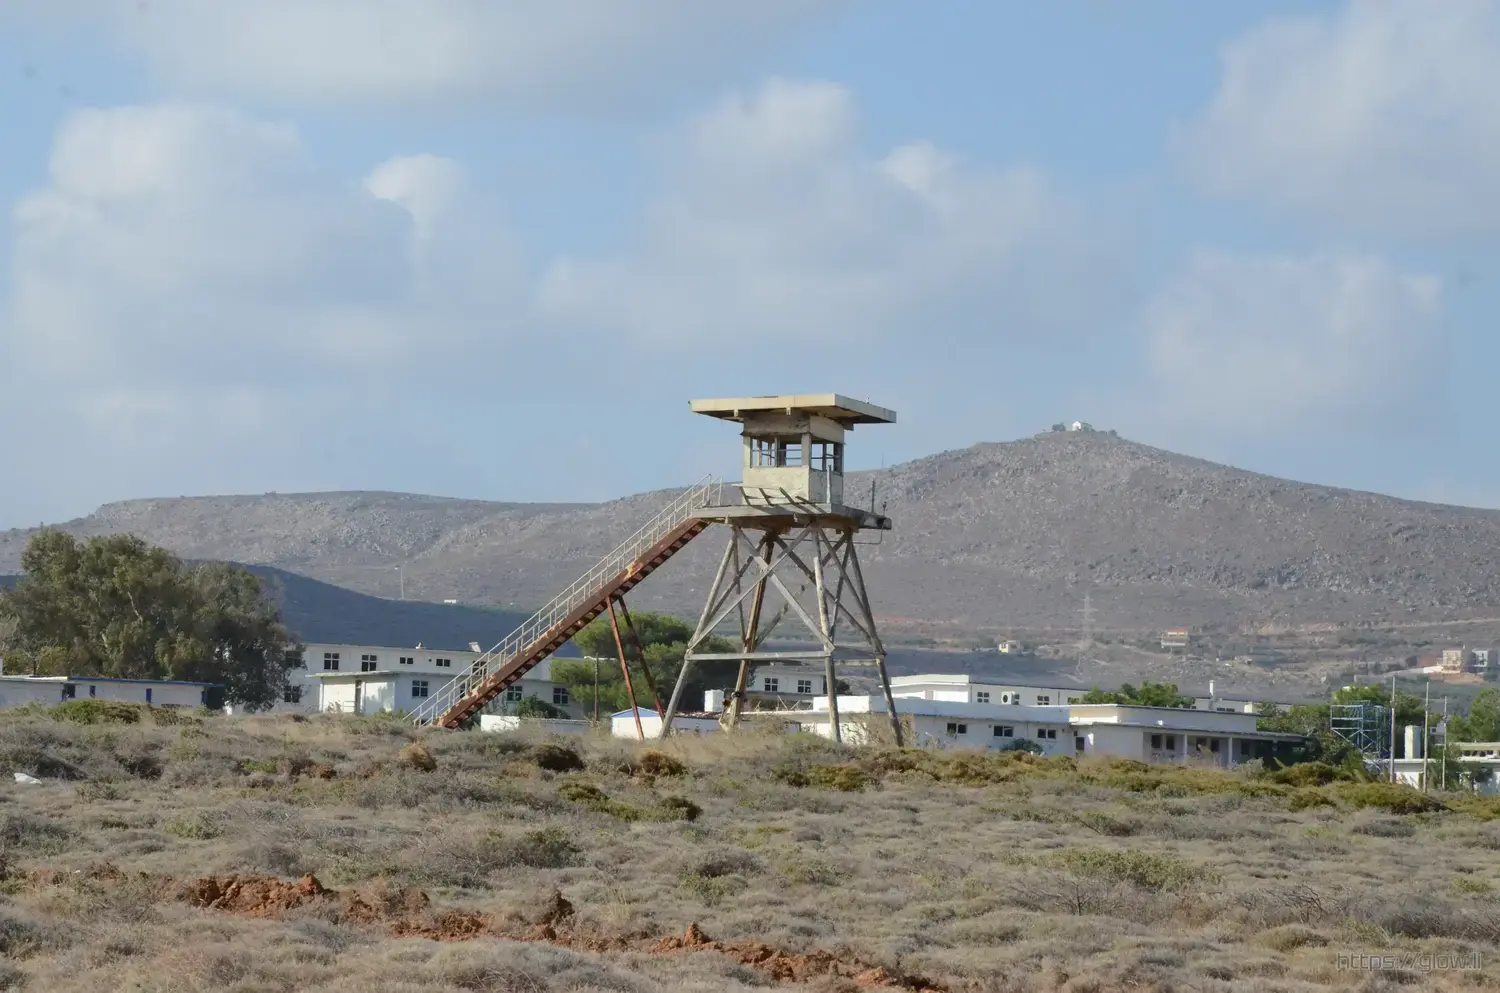 Photo of a rusty guard tower